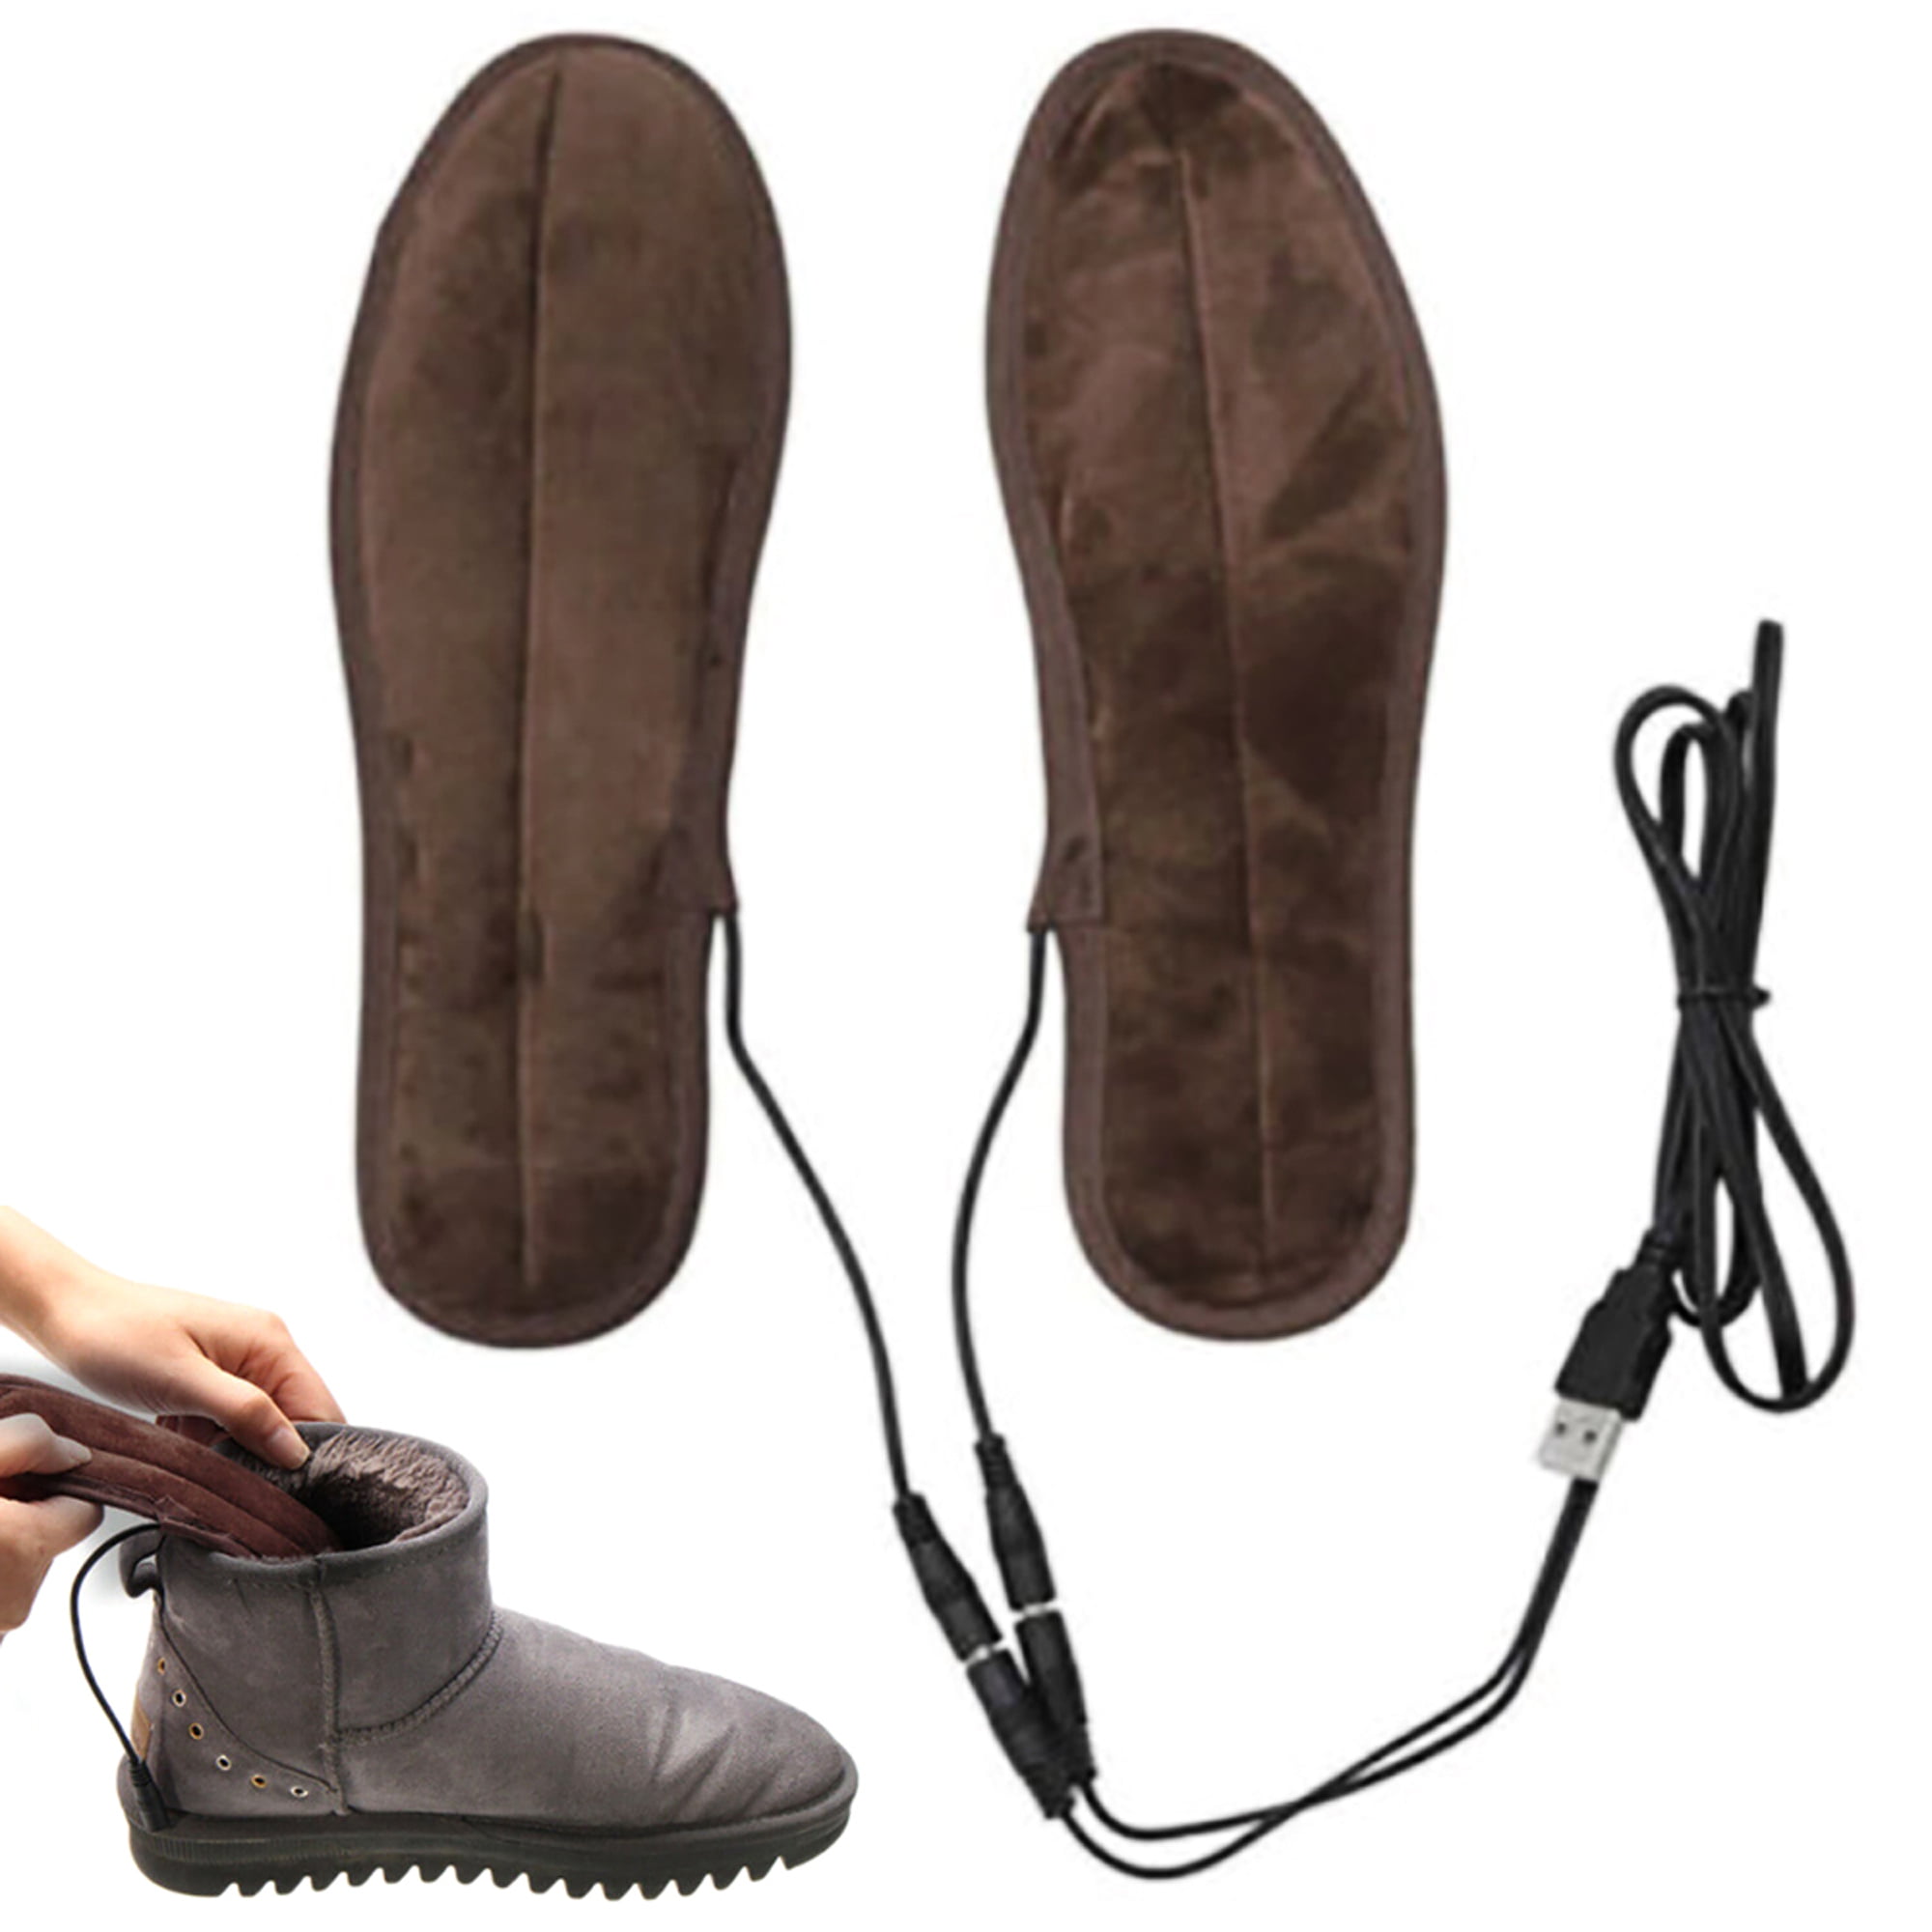 Socks Heated Shoes Insoles Rechargeable Boots Pad Warm Charging Film USB 